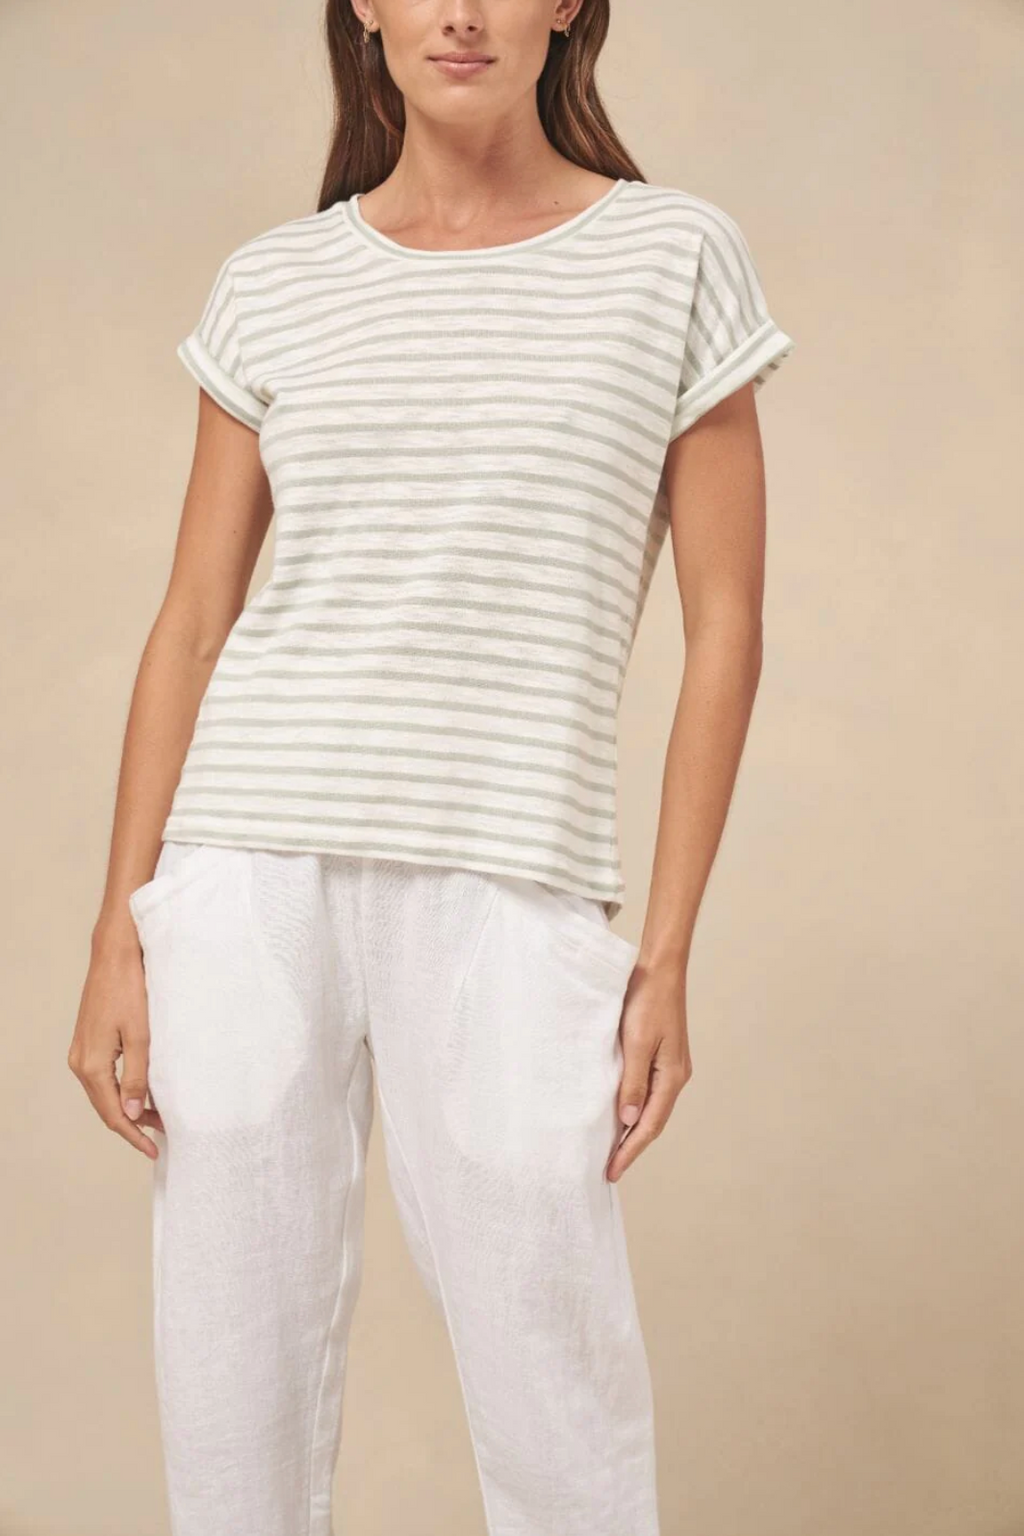 oscar stripe tee by little lies is a cotton rolled sleeve t shirt